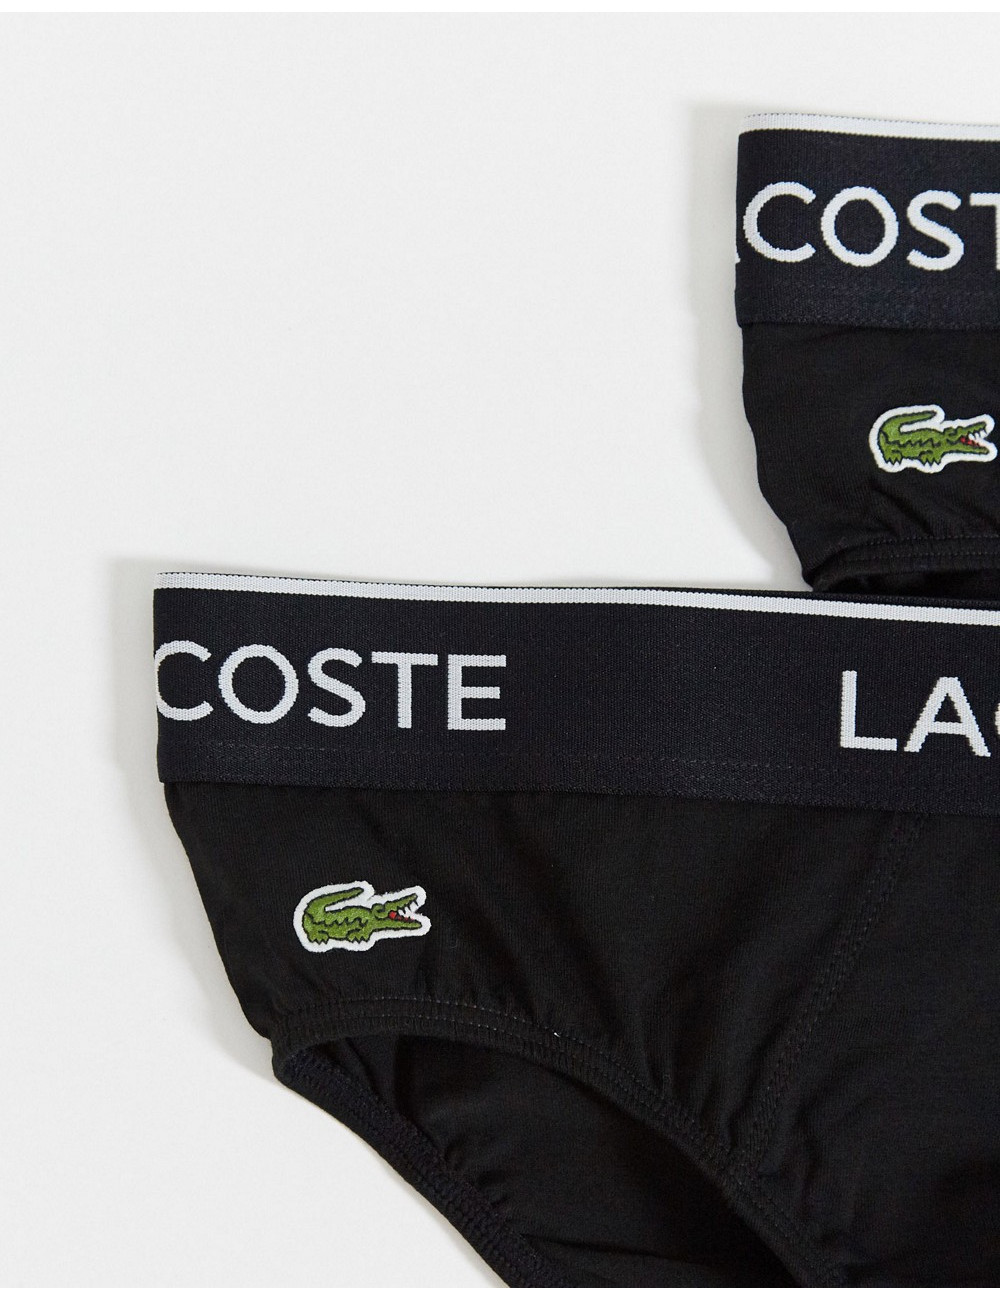 Lacoste 3 pack briefs in black